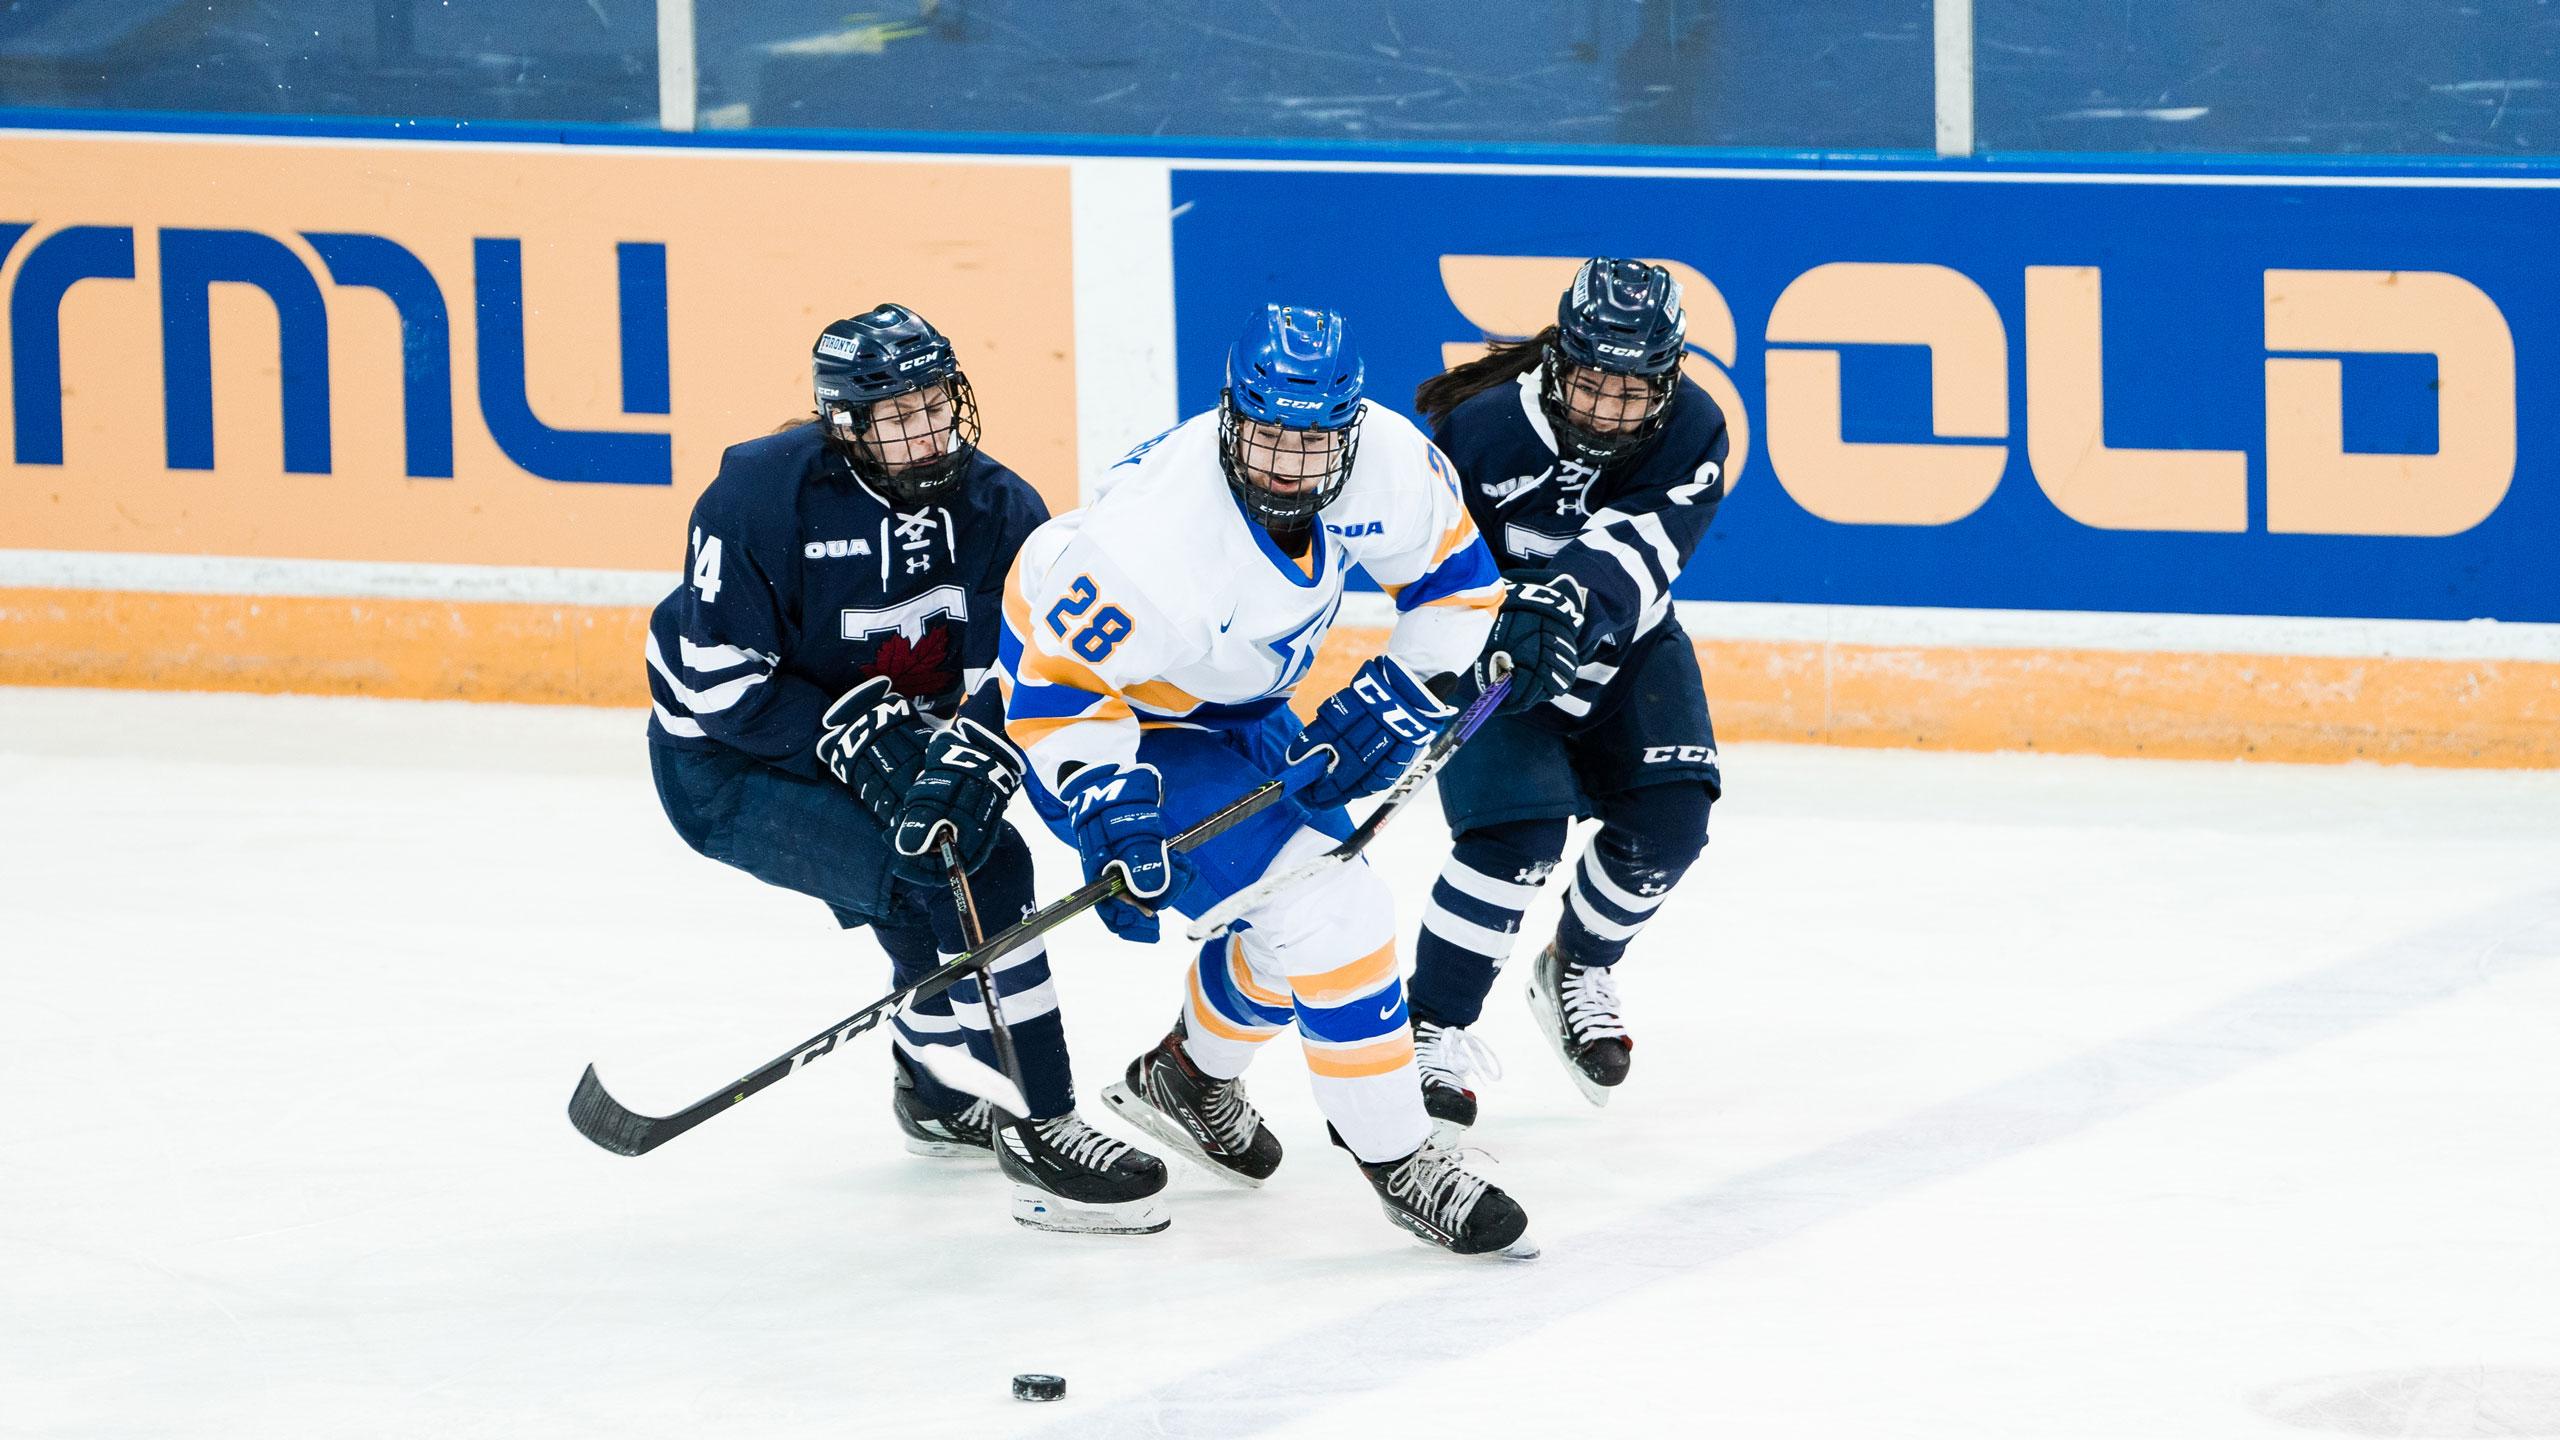 A TMU women's hockey player in a white jersey skates with the puck in front of two U of T players in dark blue jerseys